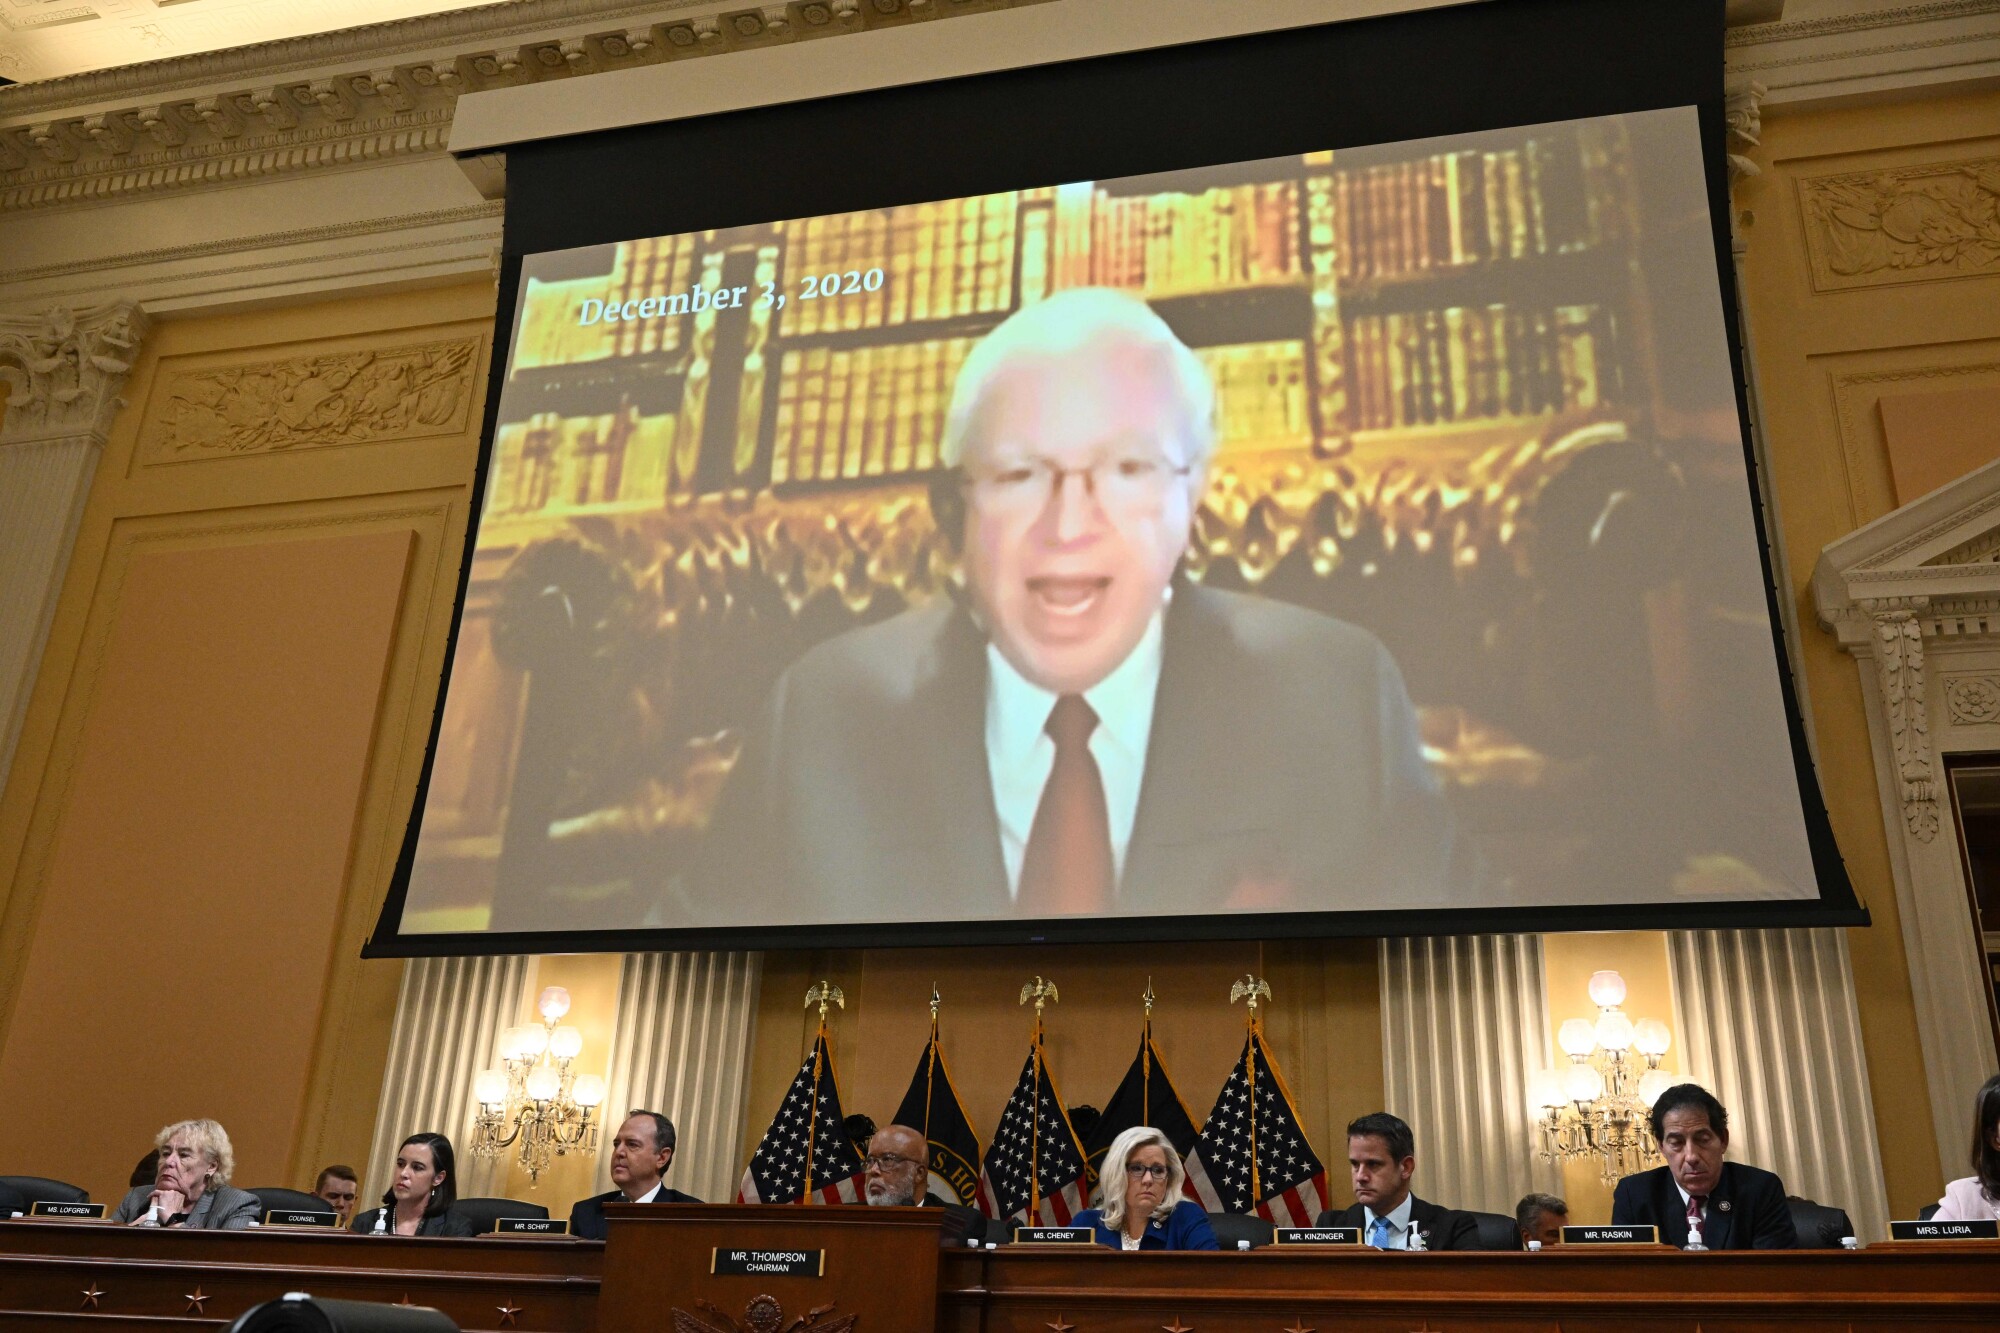 John Eastman appears on a big screen during a congressional hearing.